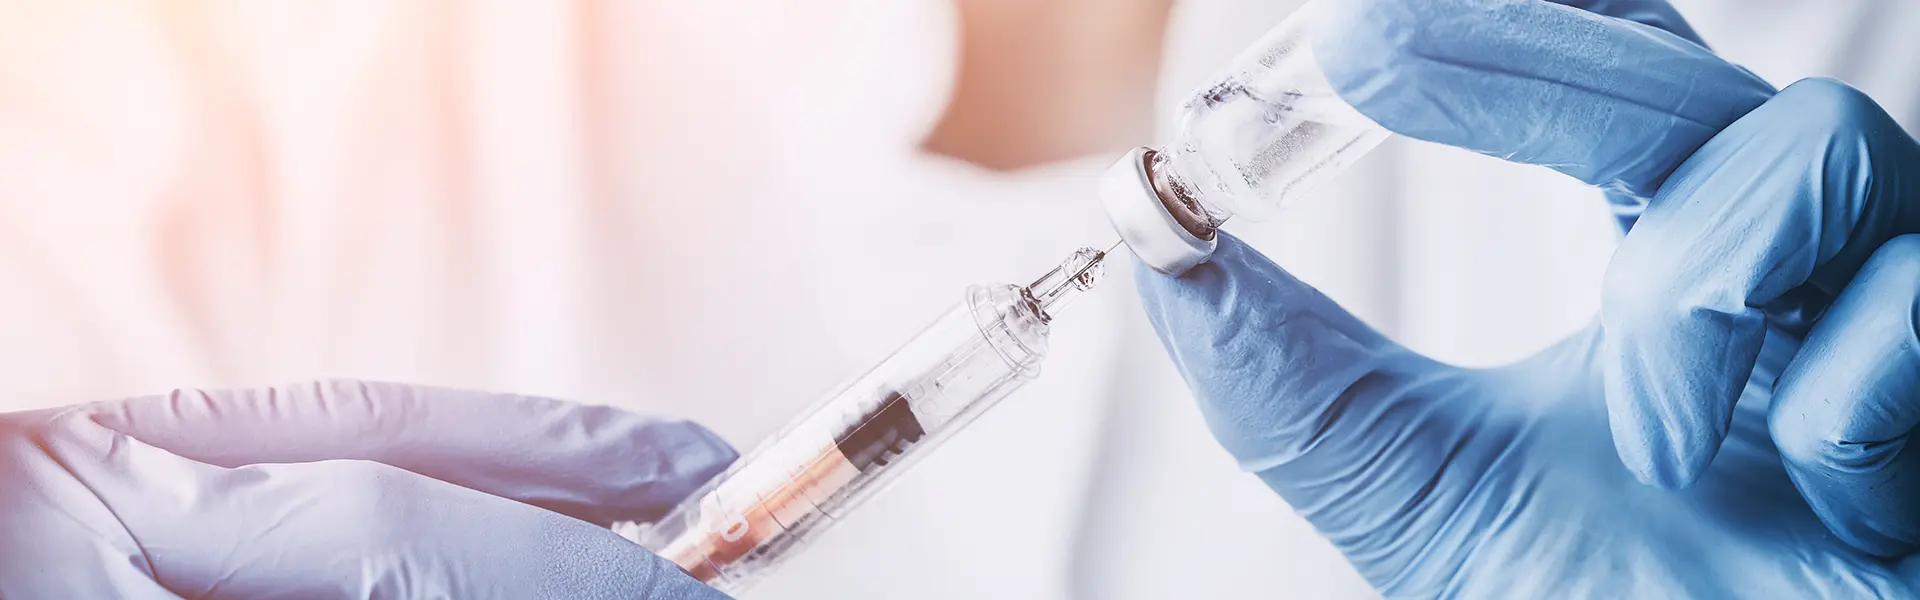 injecting injection vaccine vaccination